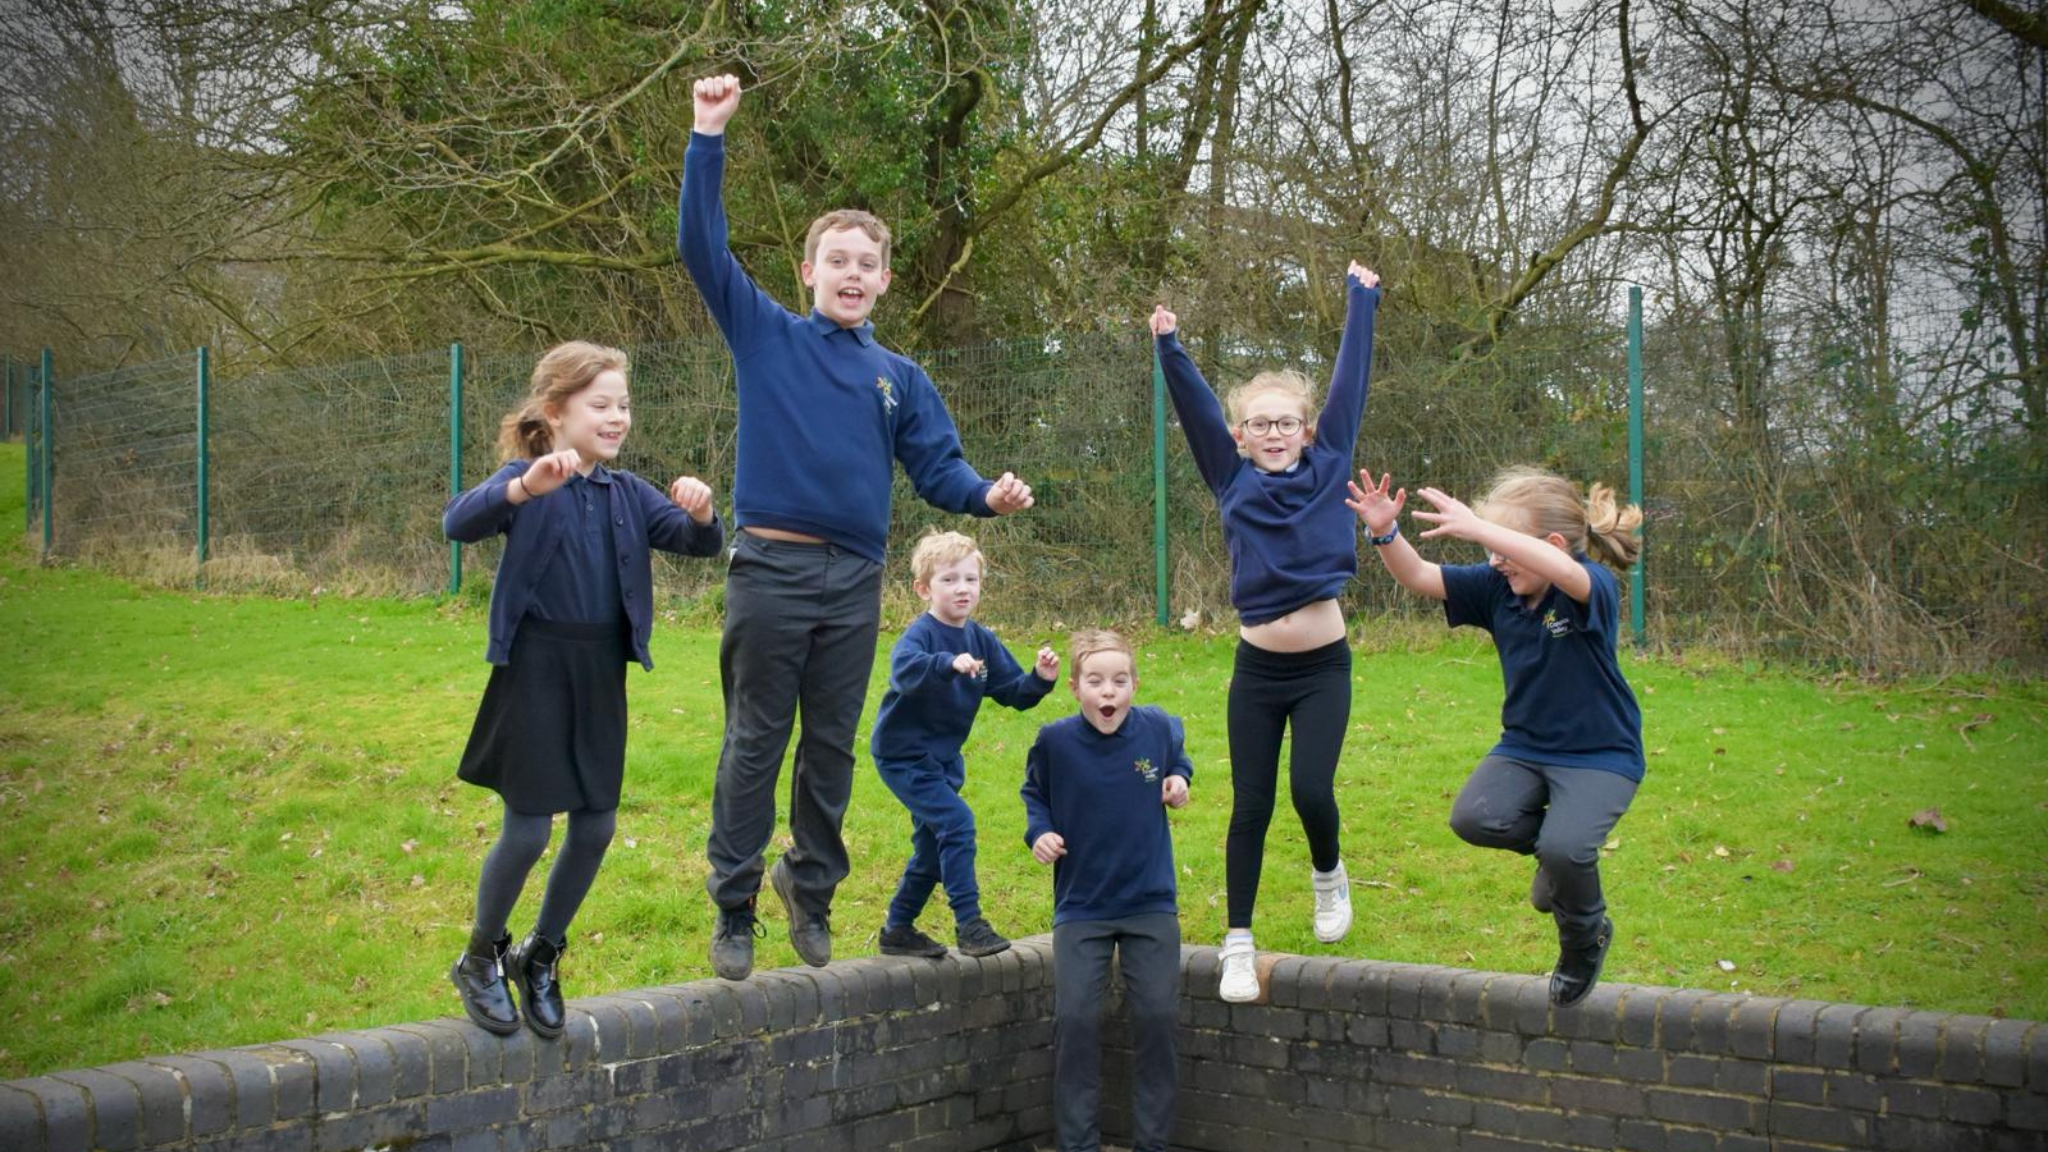 Group of children in school unifrom jumping off a brick wall